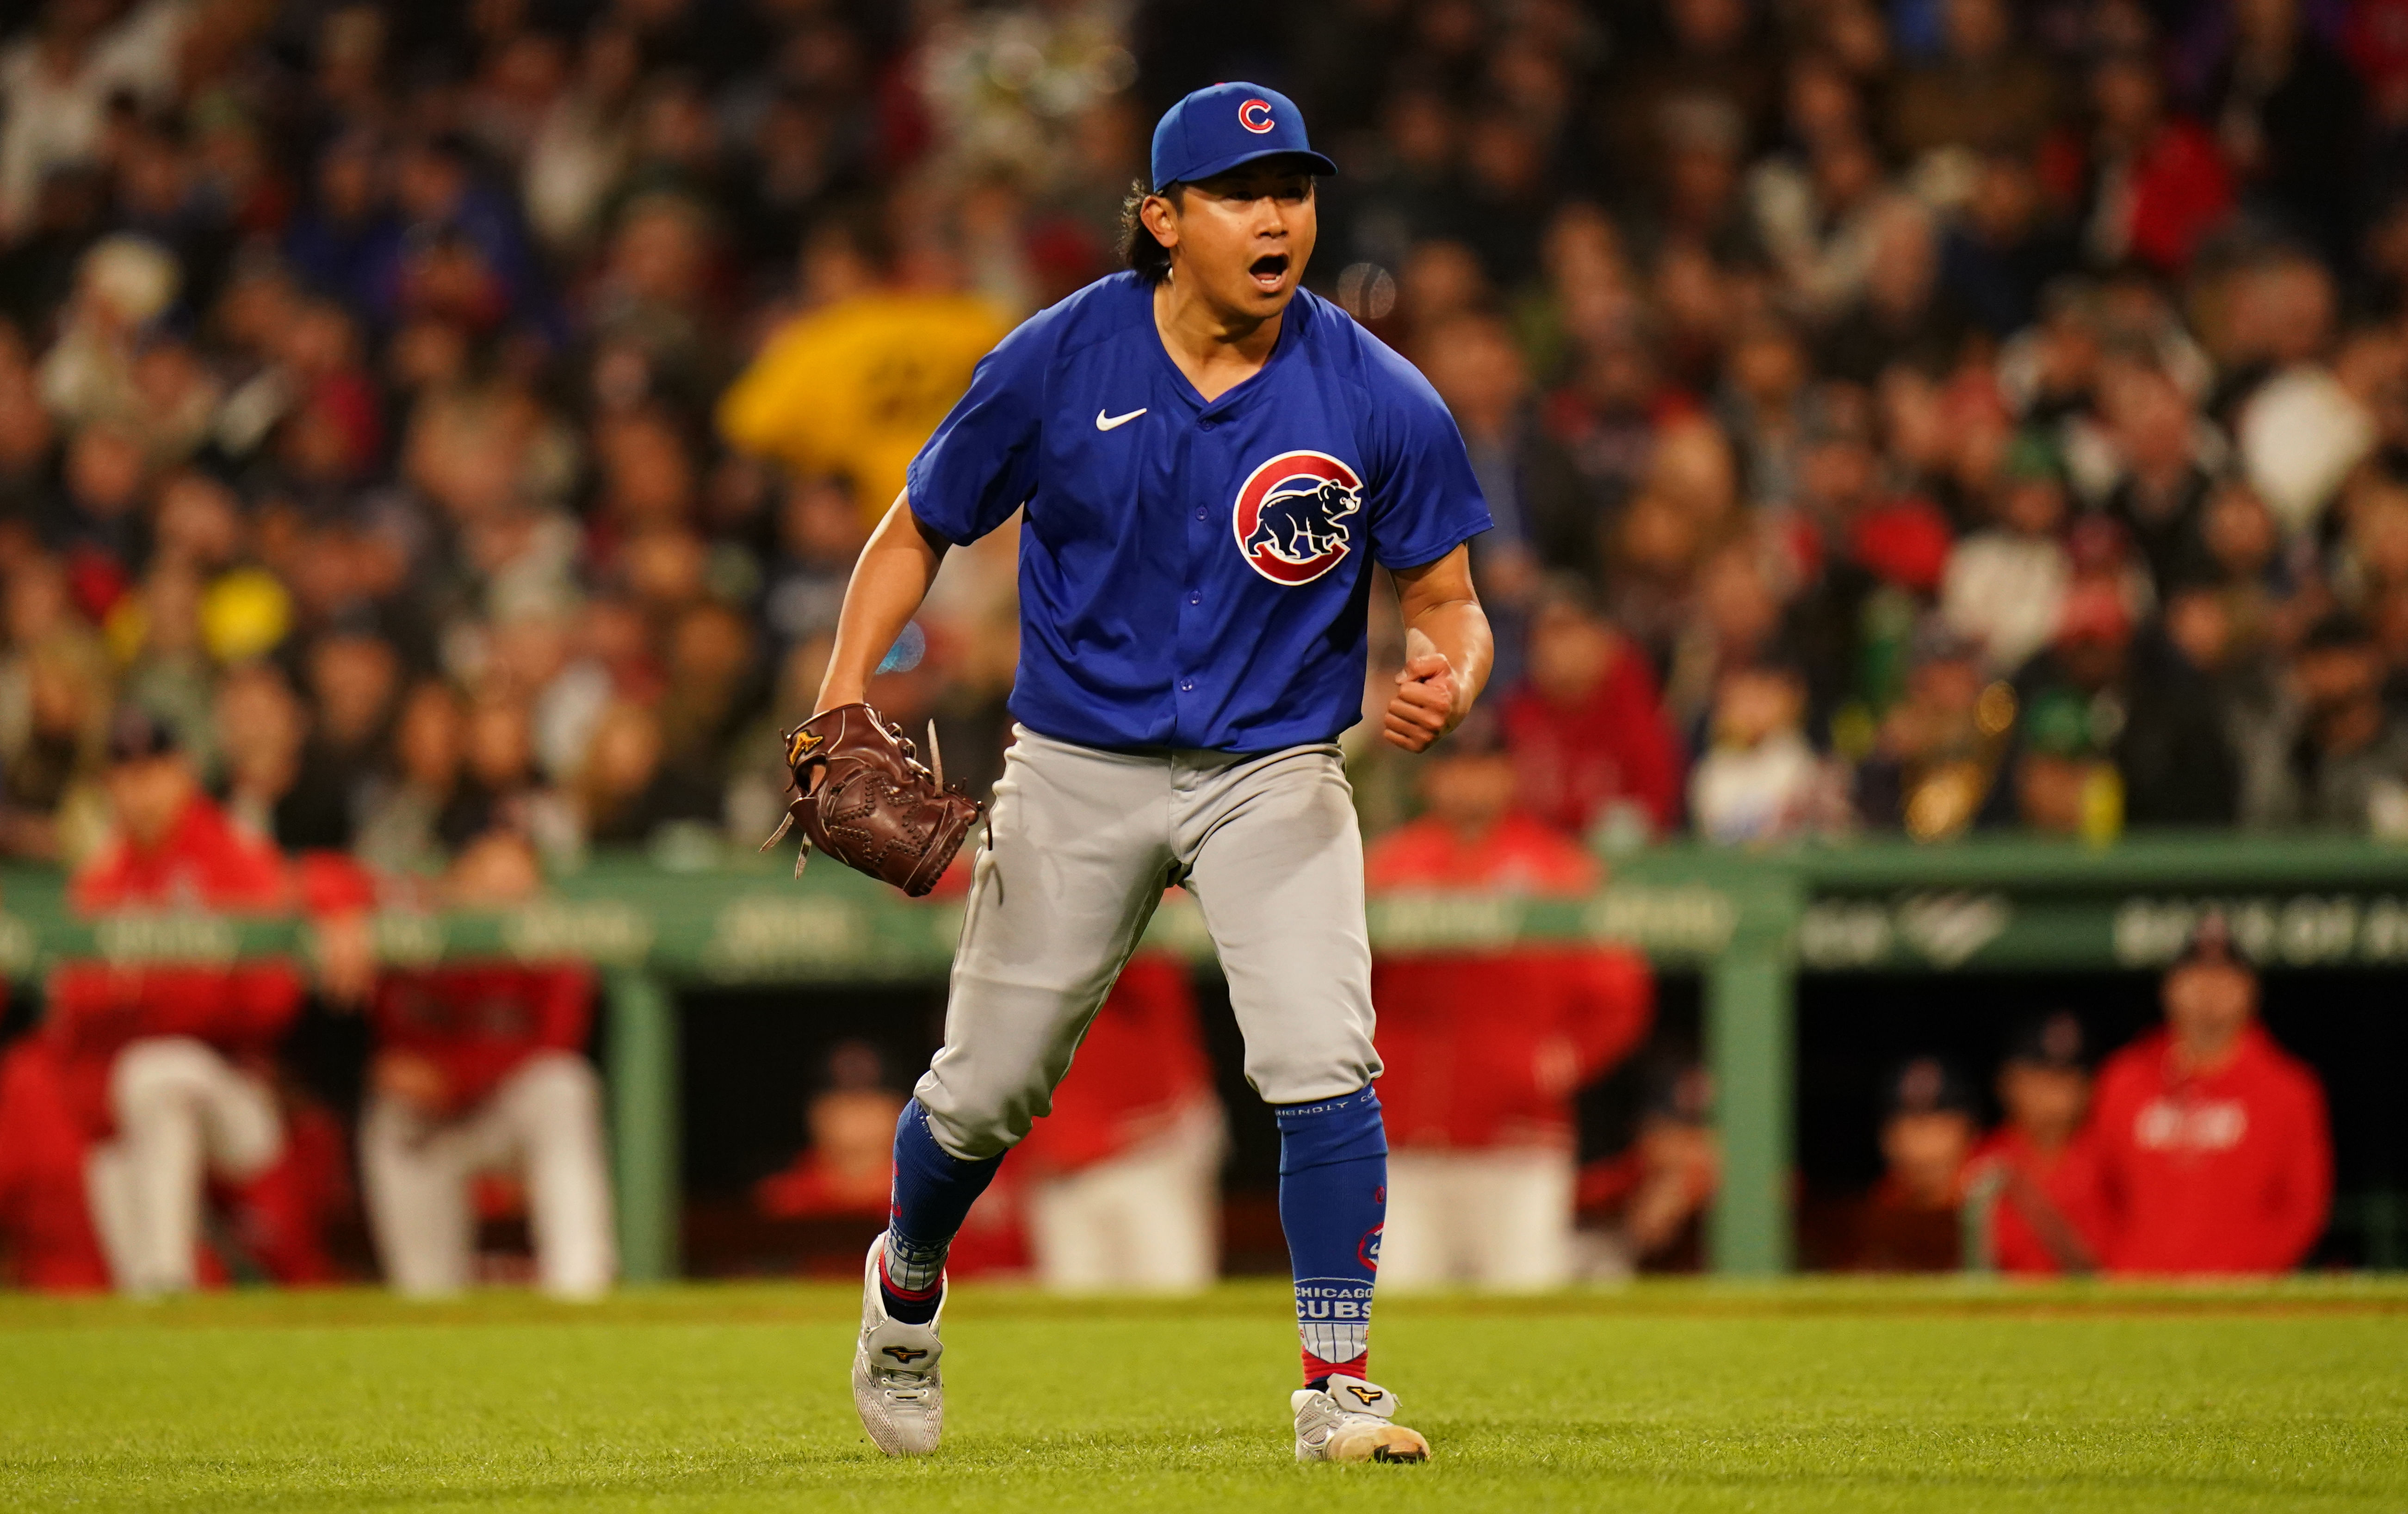 Shota Imanaga has been an ace for the Cubs